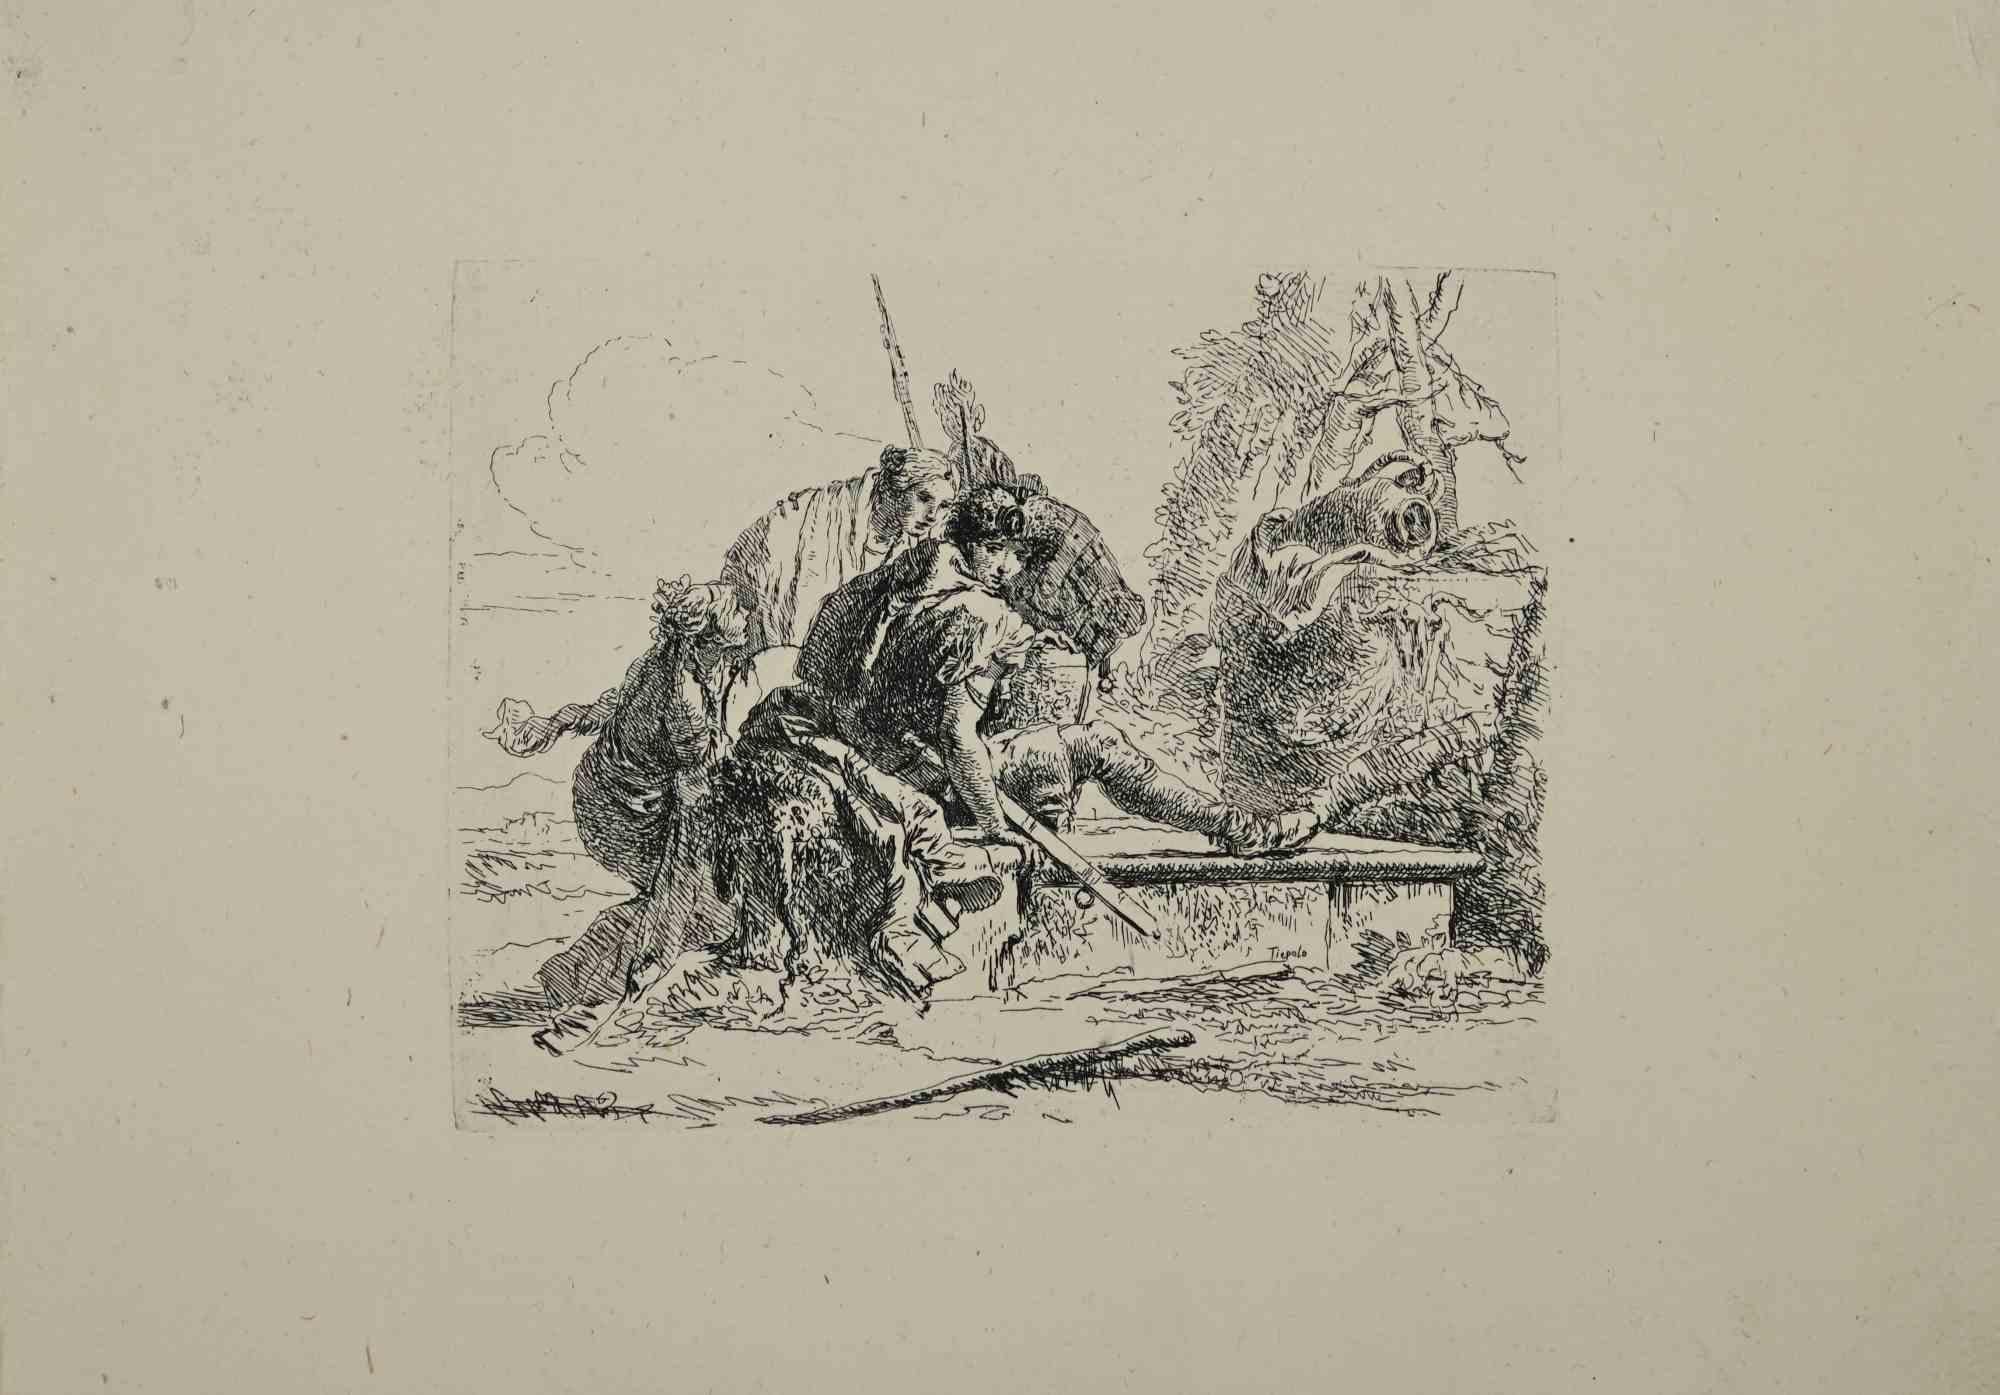 Giovanni Battista Tiepolo Figurative Print - Woman Soldiers - Etching by G.B. Tiepolo - 1785